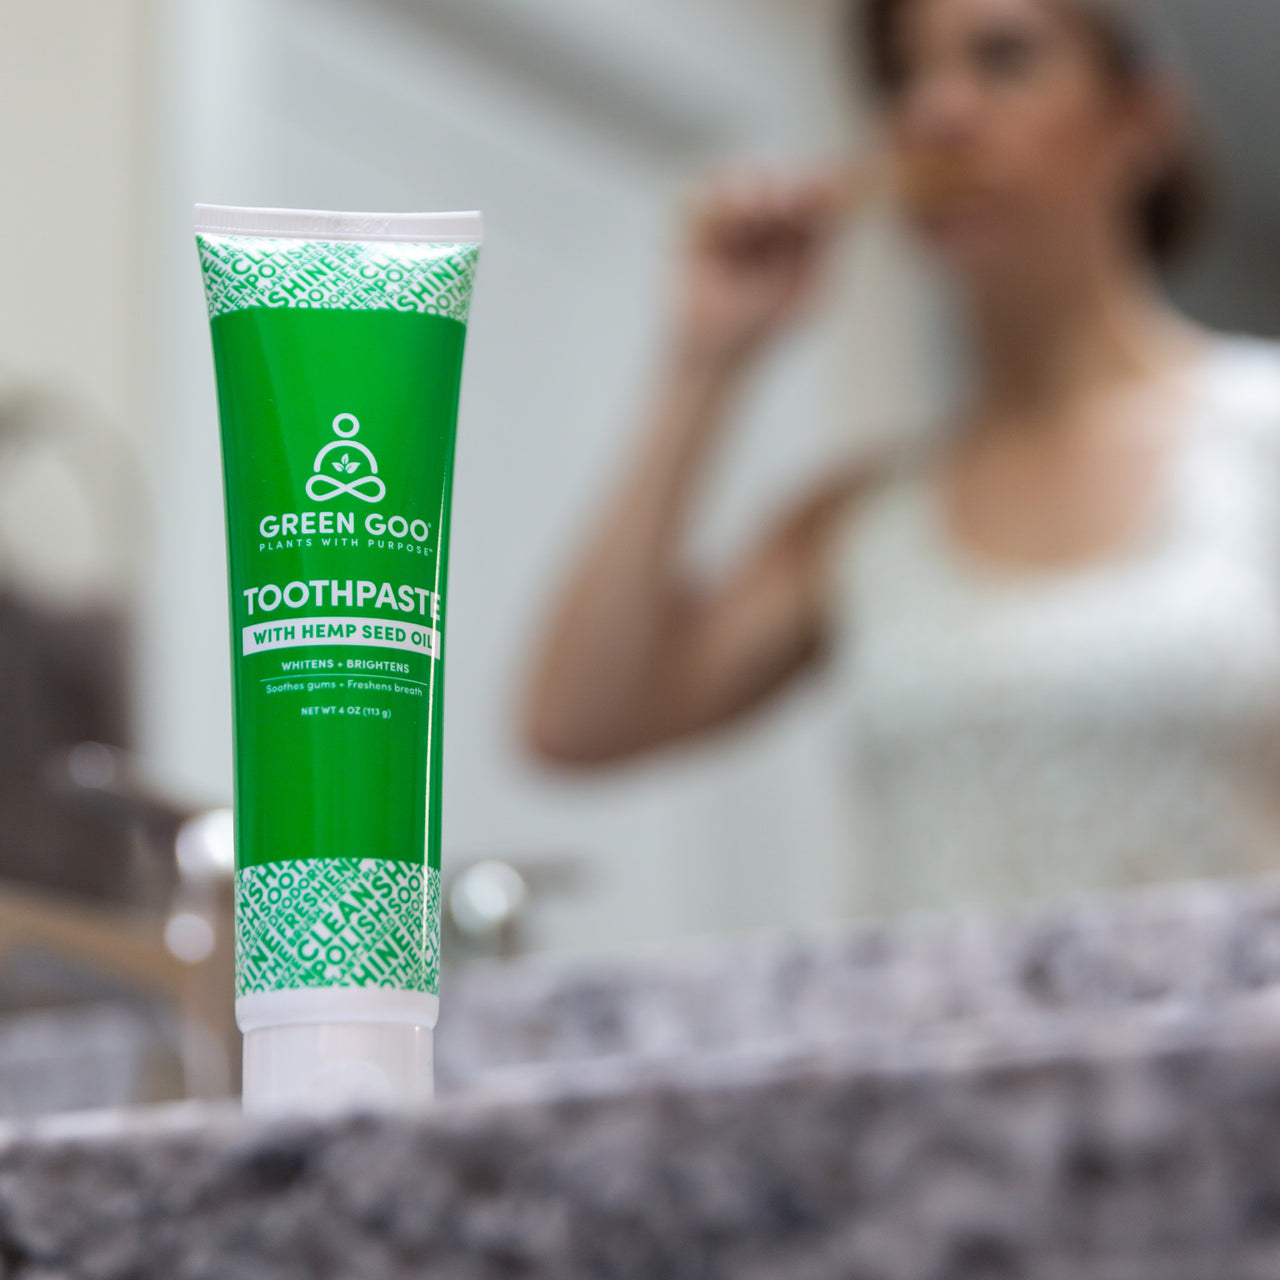 Toothpaste with Hemp Seed Oil